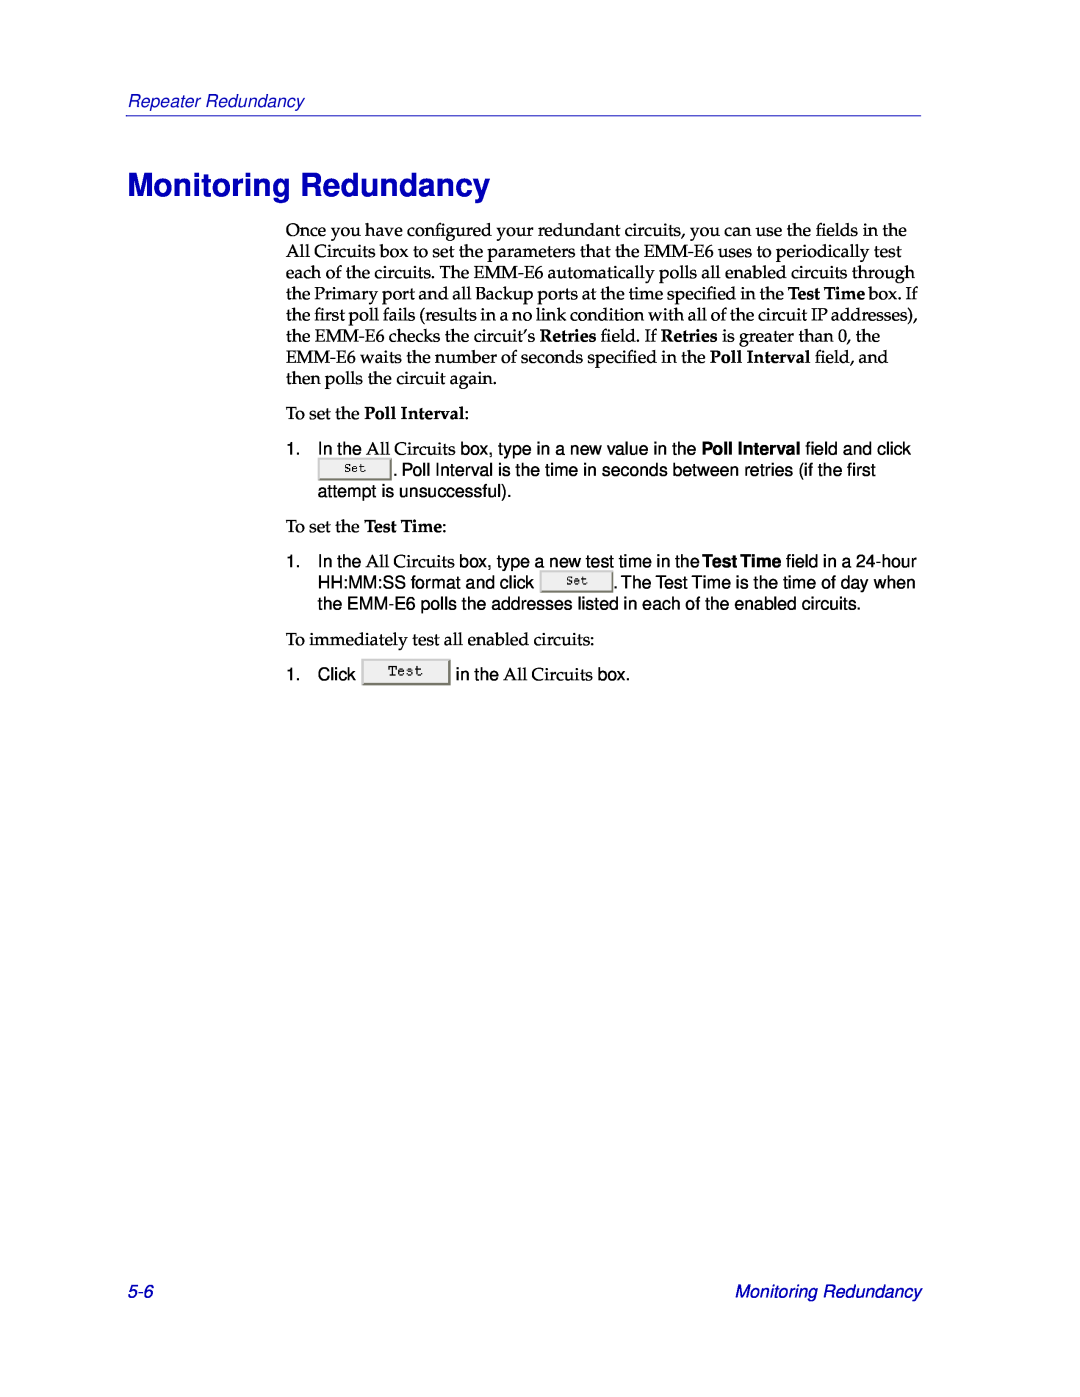 Cabletron Systems EMM-E6 manual Monitoring Redundancy, To set the Poll Interval, Repeater Redundancy 